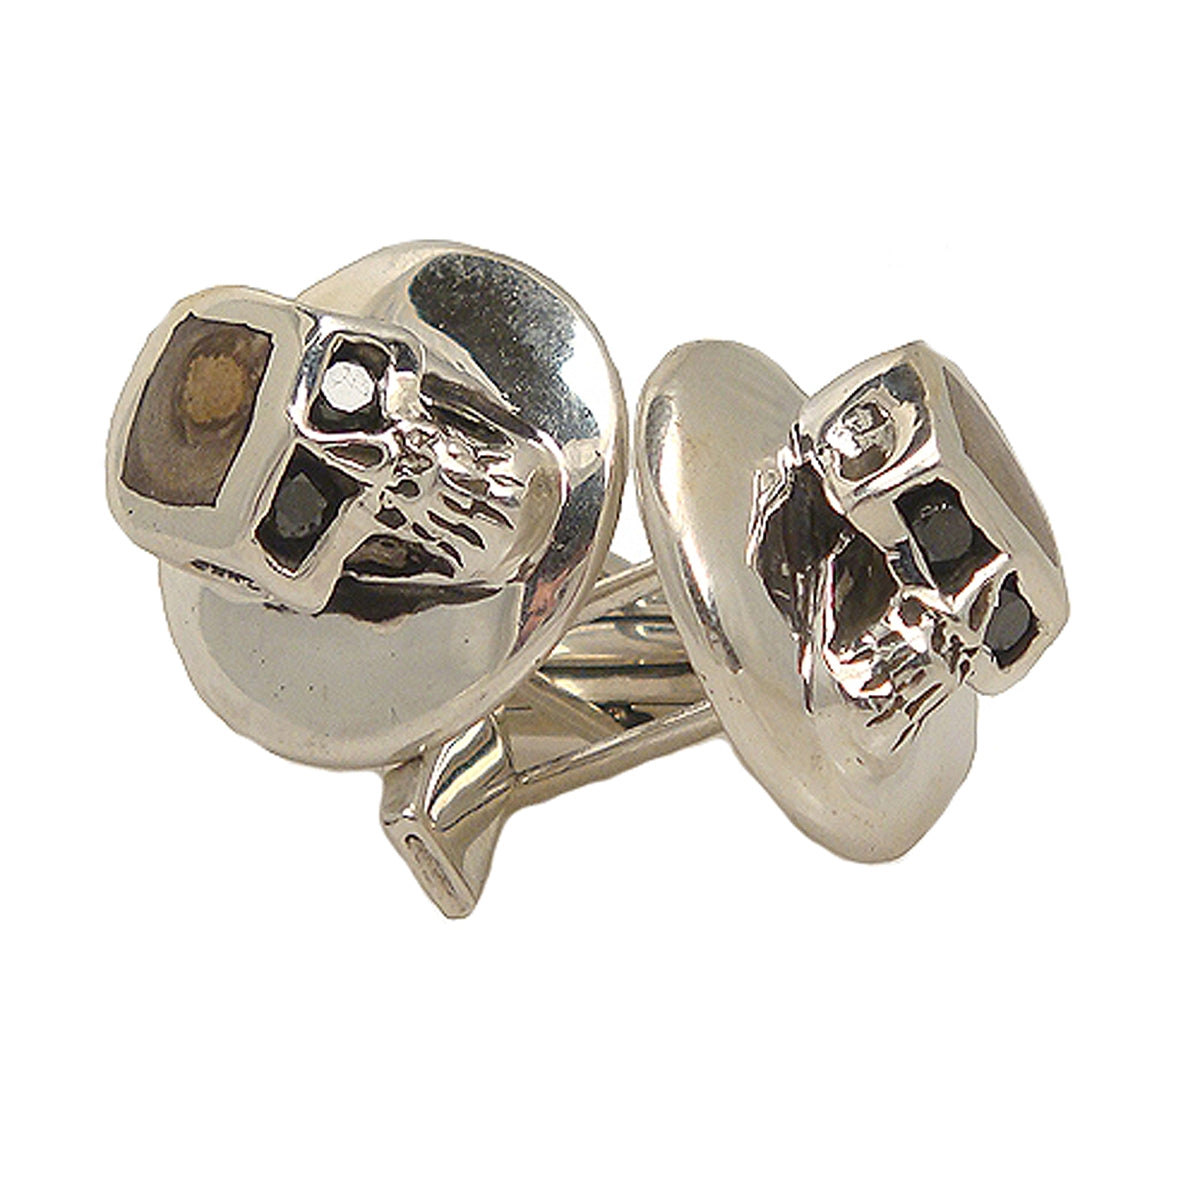 MARCOS - &quot;BLACK DIAMOND SKULL&quot; Sterling Cufflinks with Inlaid BOX ELDER Wood Accent